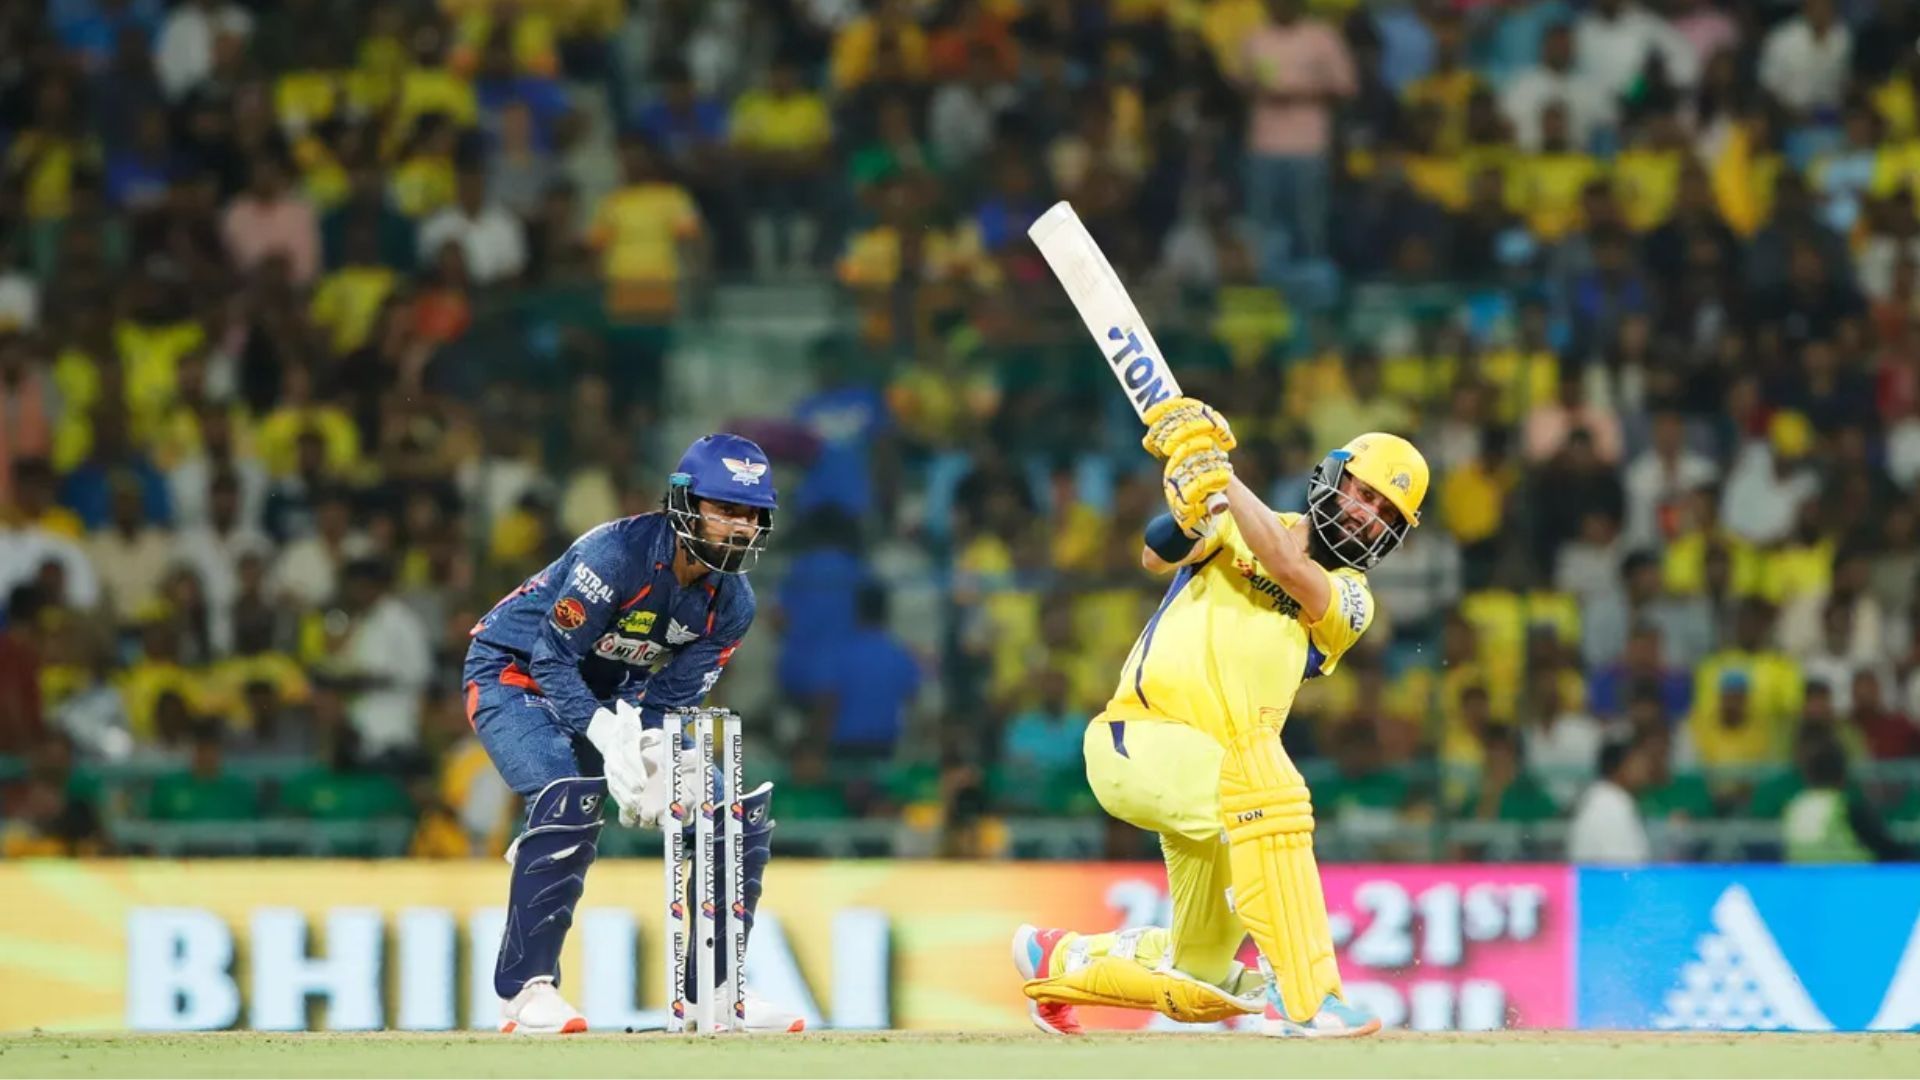 Moeen Ali was dismissed by Ravi Bishnoi, but not before some absolute carange by the southpaw